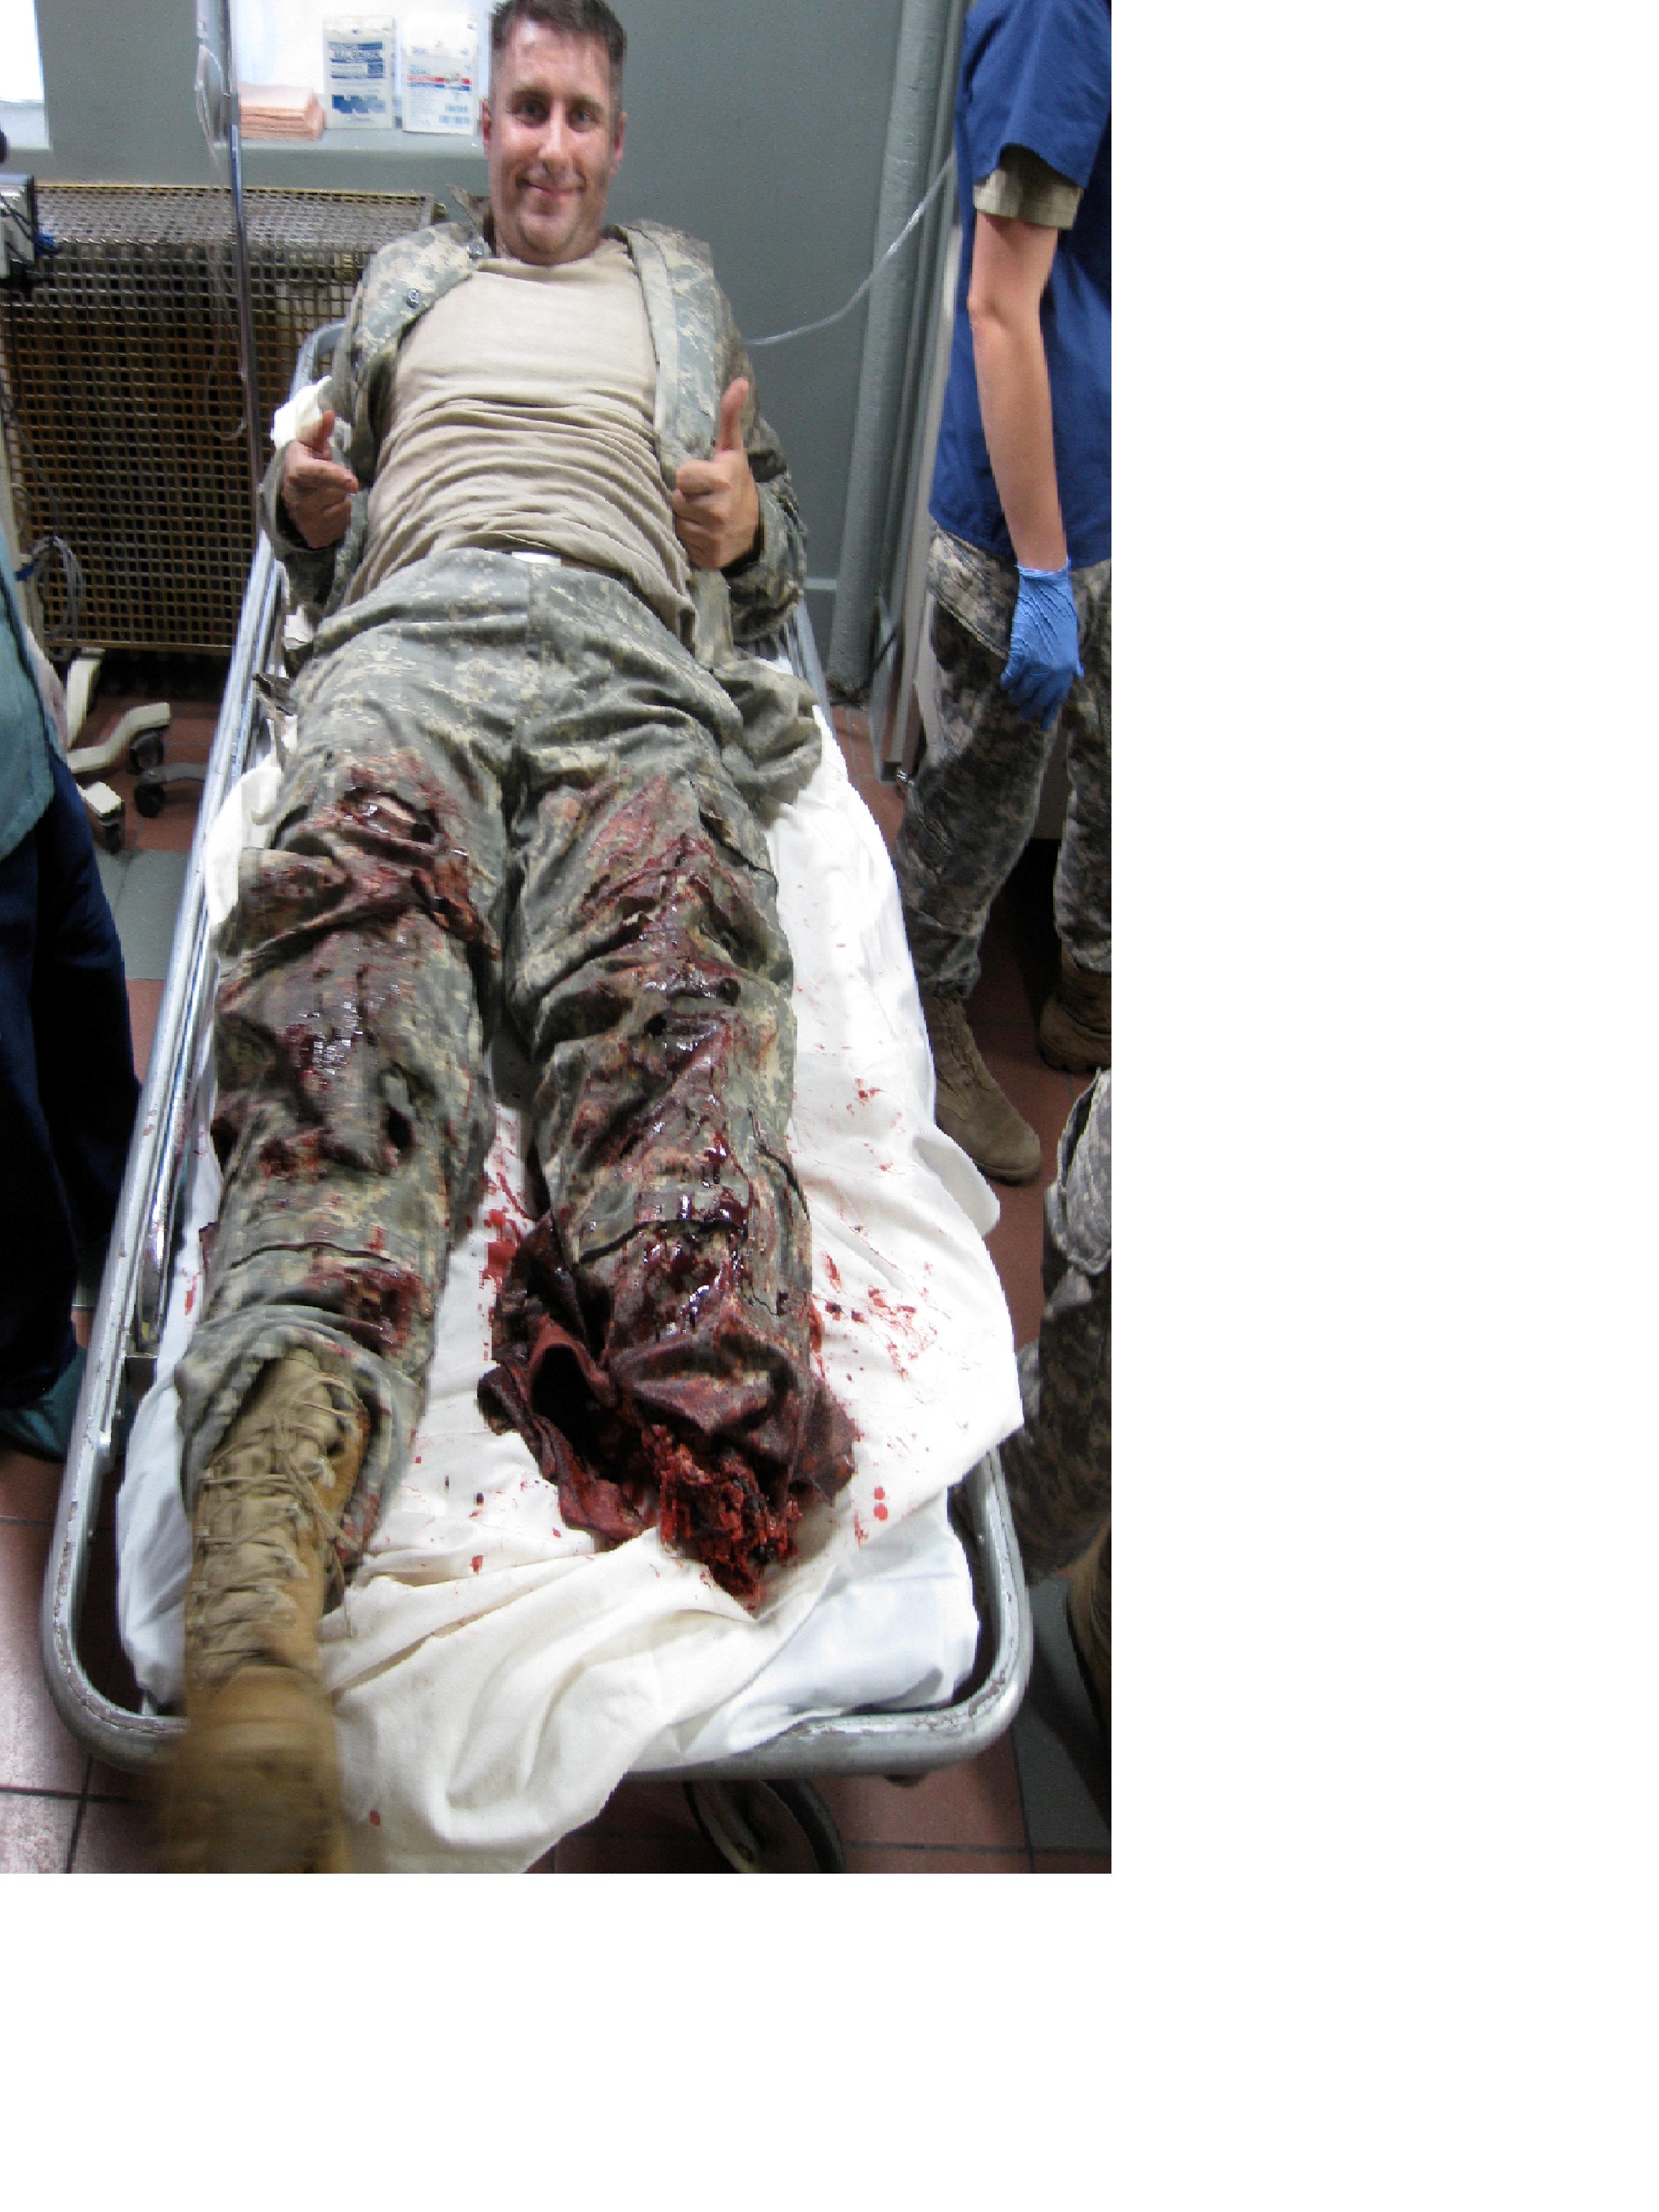 On-set - Untold Stories of The ER - Sept 2012.....Soldier (Hank) rushed to traum unit after leg blownoff by roadside bomb